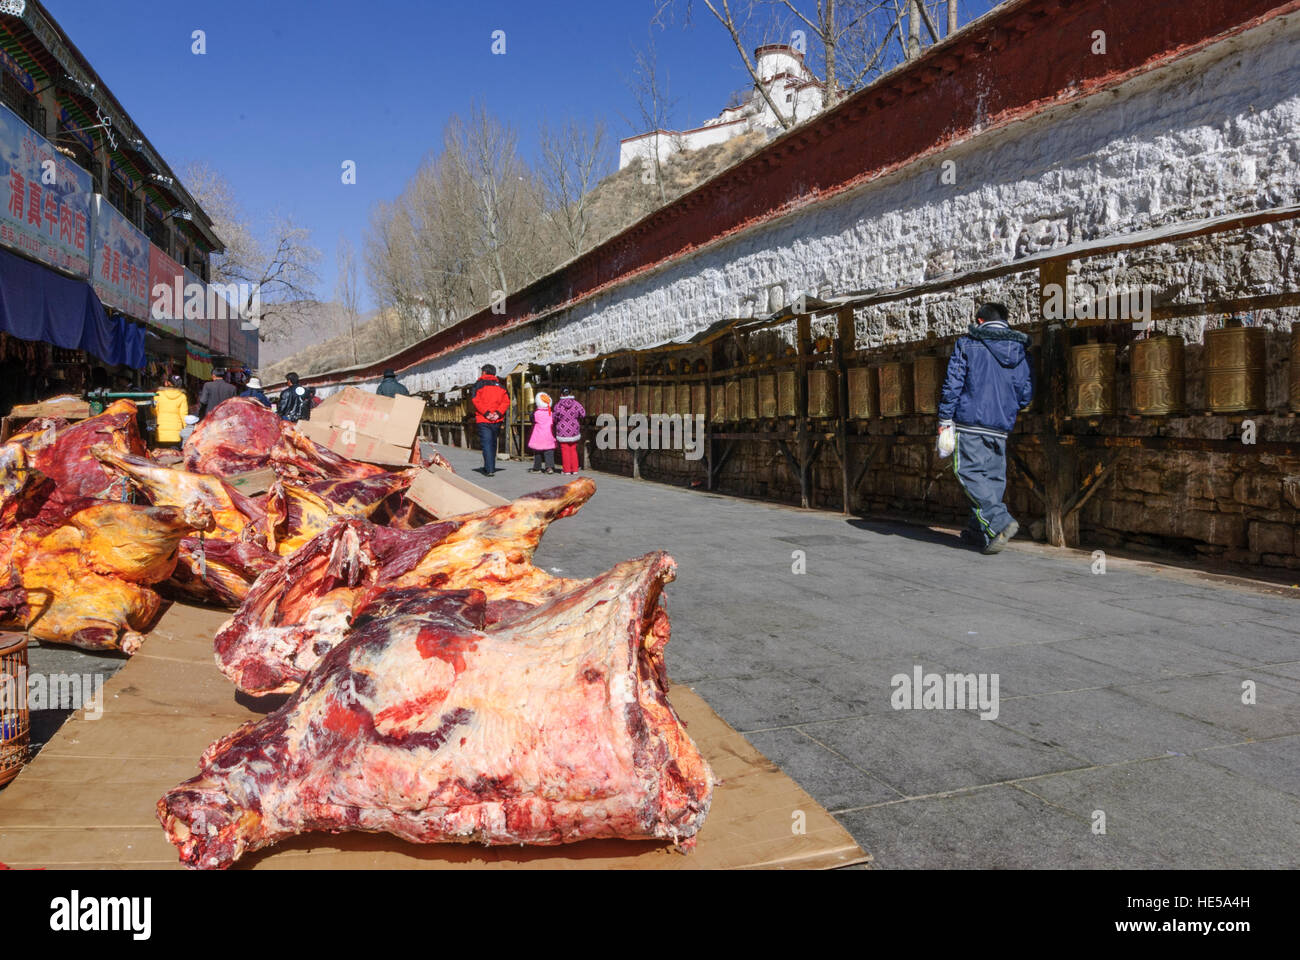 Lhasa: Dried meat waits for buyers, while Tibetans turn on the Kora (pilgrimage route) around the Potala Palace prayer mills, Tibet, China Stock Photo